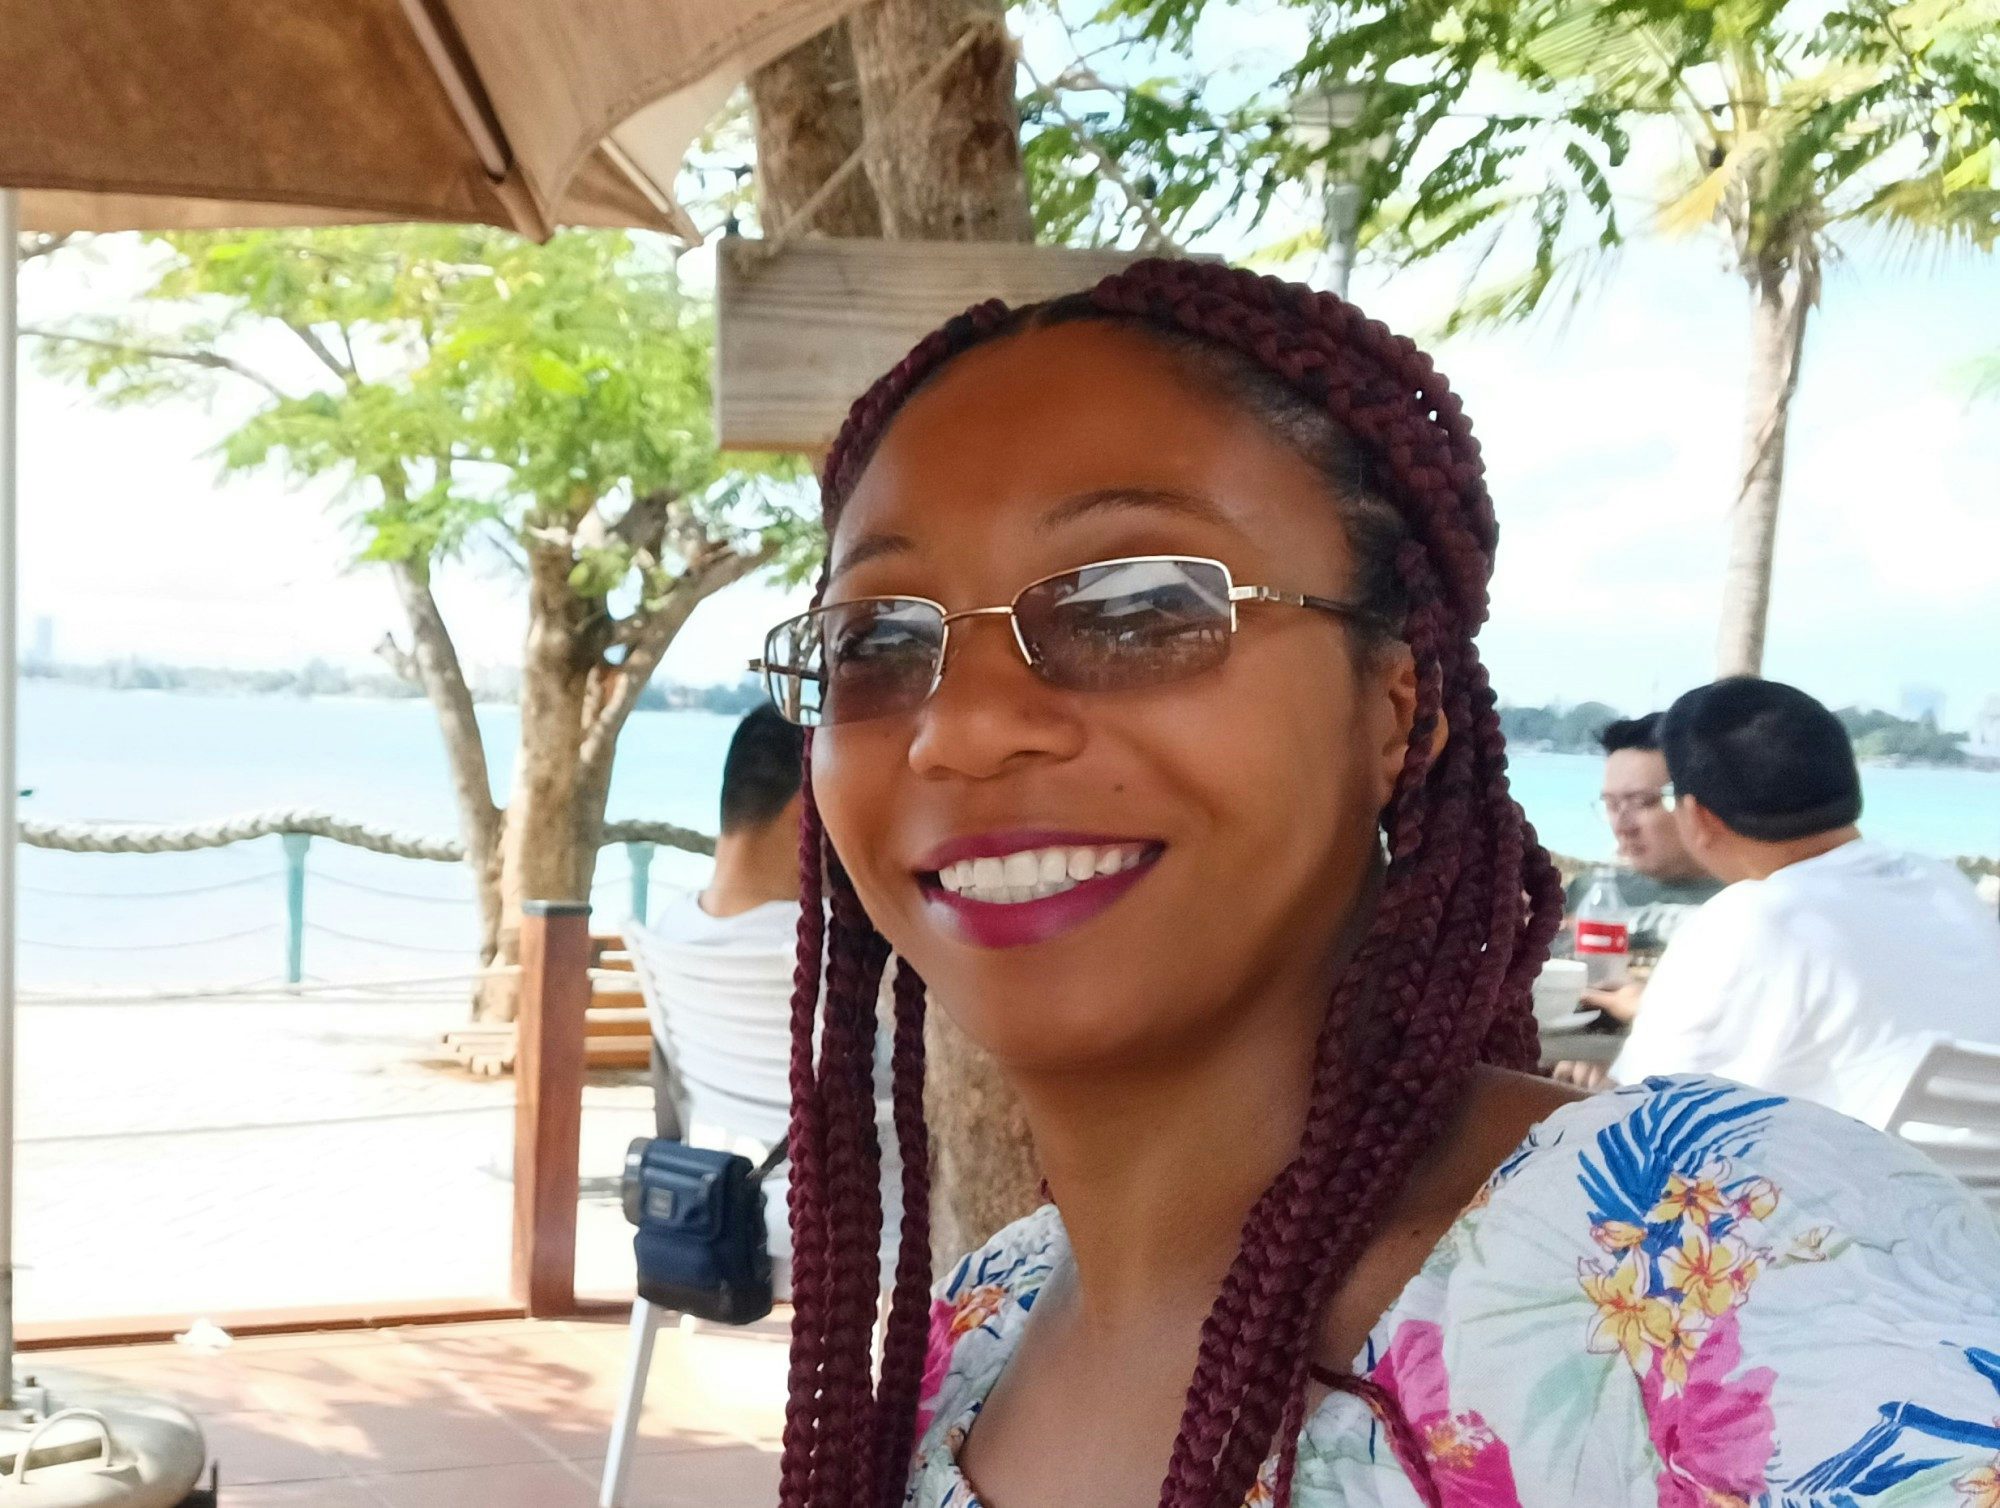 travel advisor Angela Chalmers wears a colorful printed top and sunglasses at a oceanside restaurant